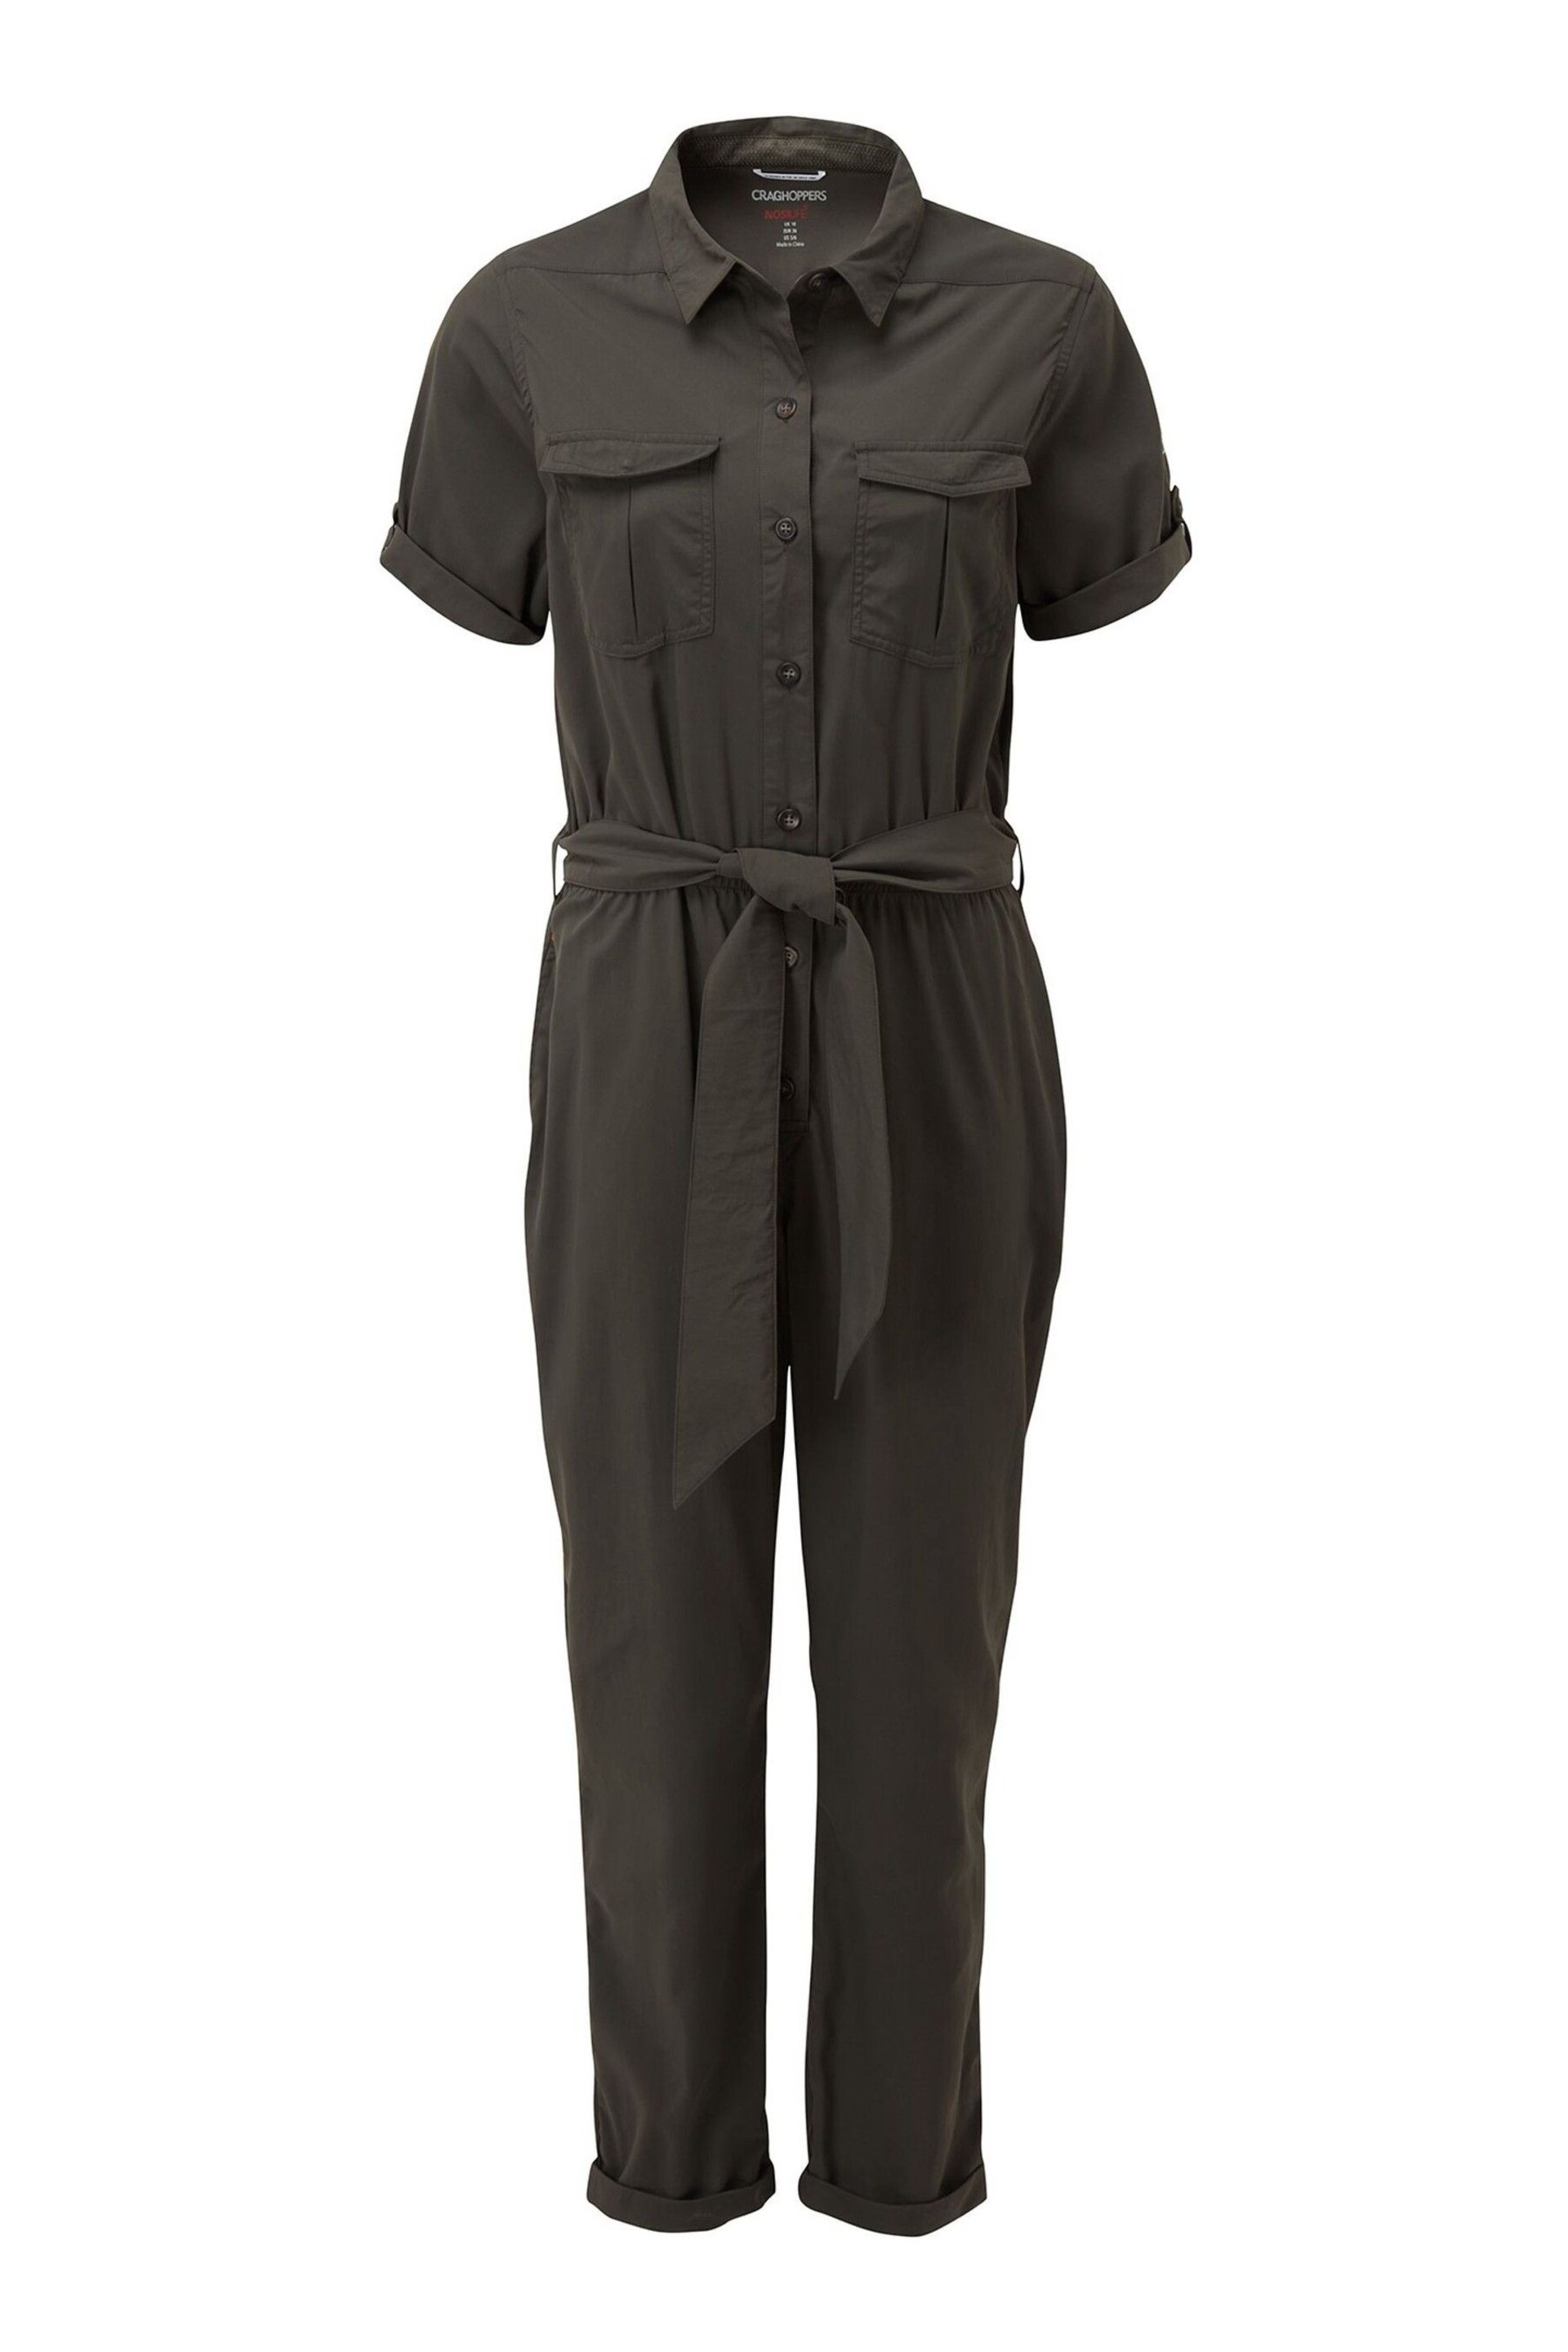 Craghoppers Green NosiLife Rania Jumpsuit - Image 4 of 4